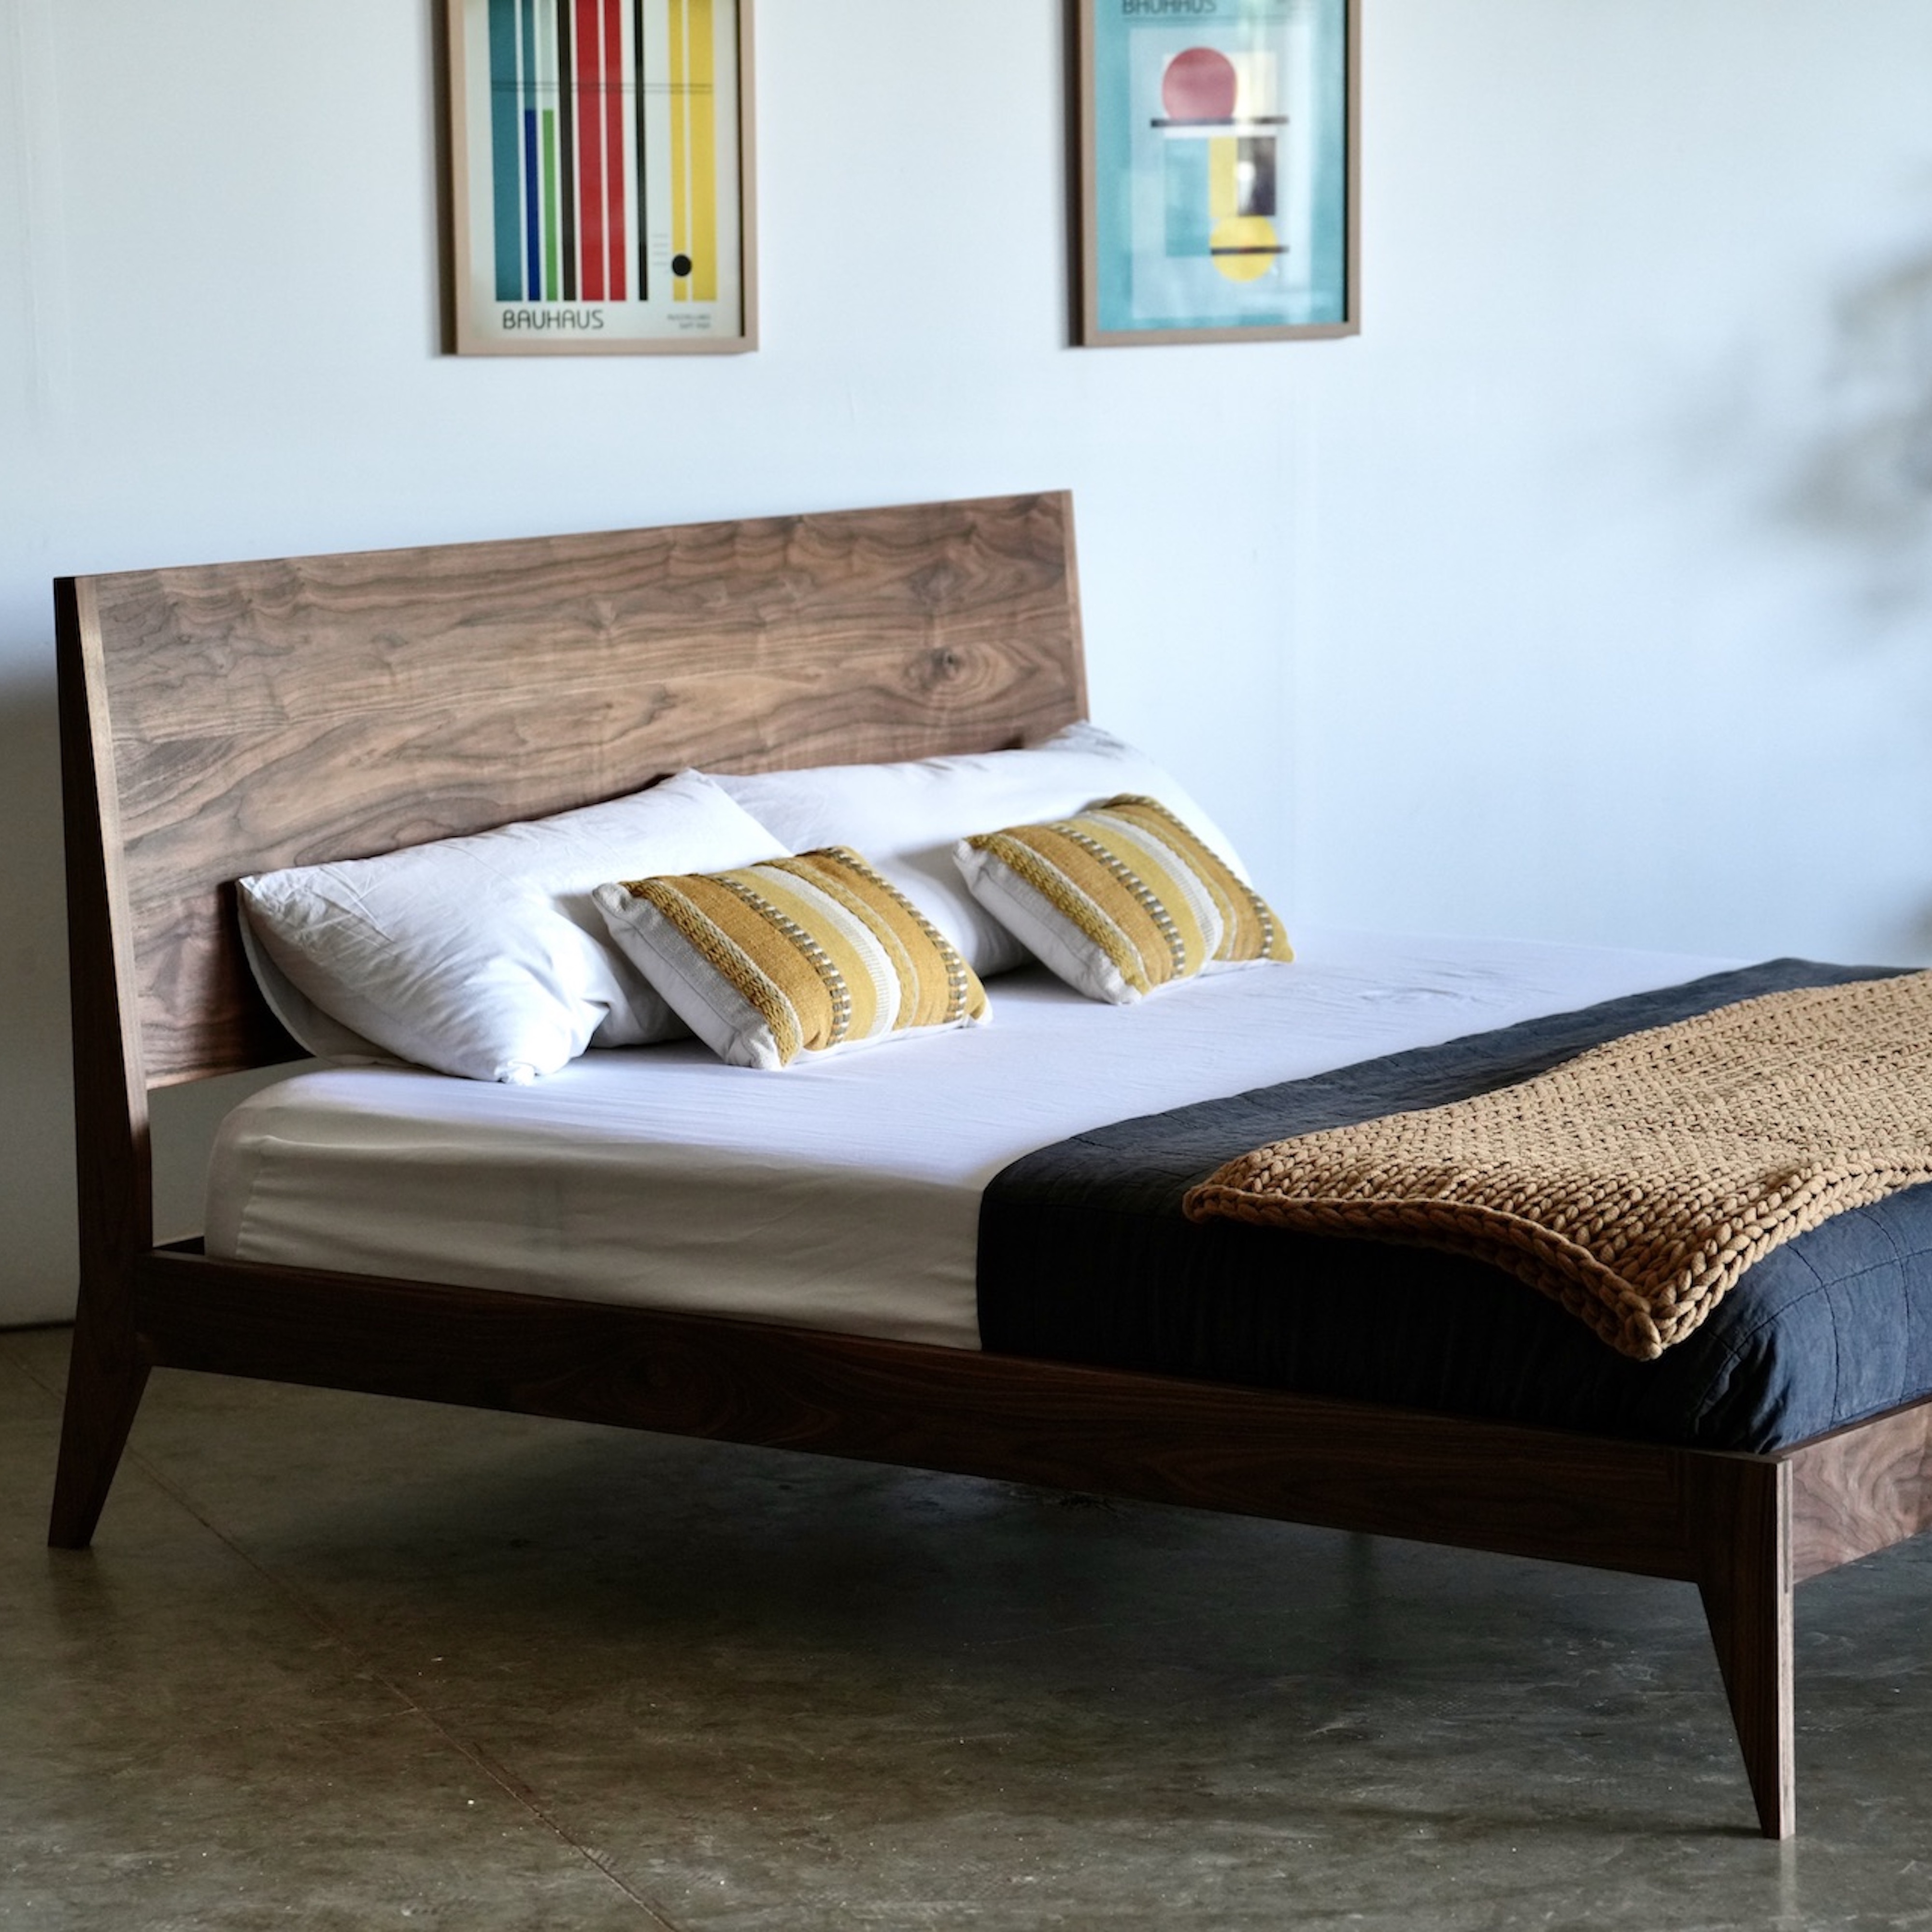 A solid wood bed with a slightly slanted headboard. It has white sheets and a yellow throw blanket and pillows.